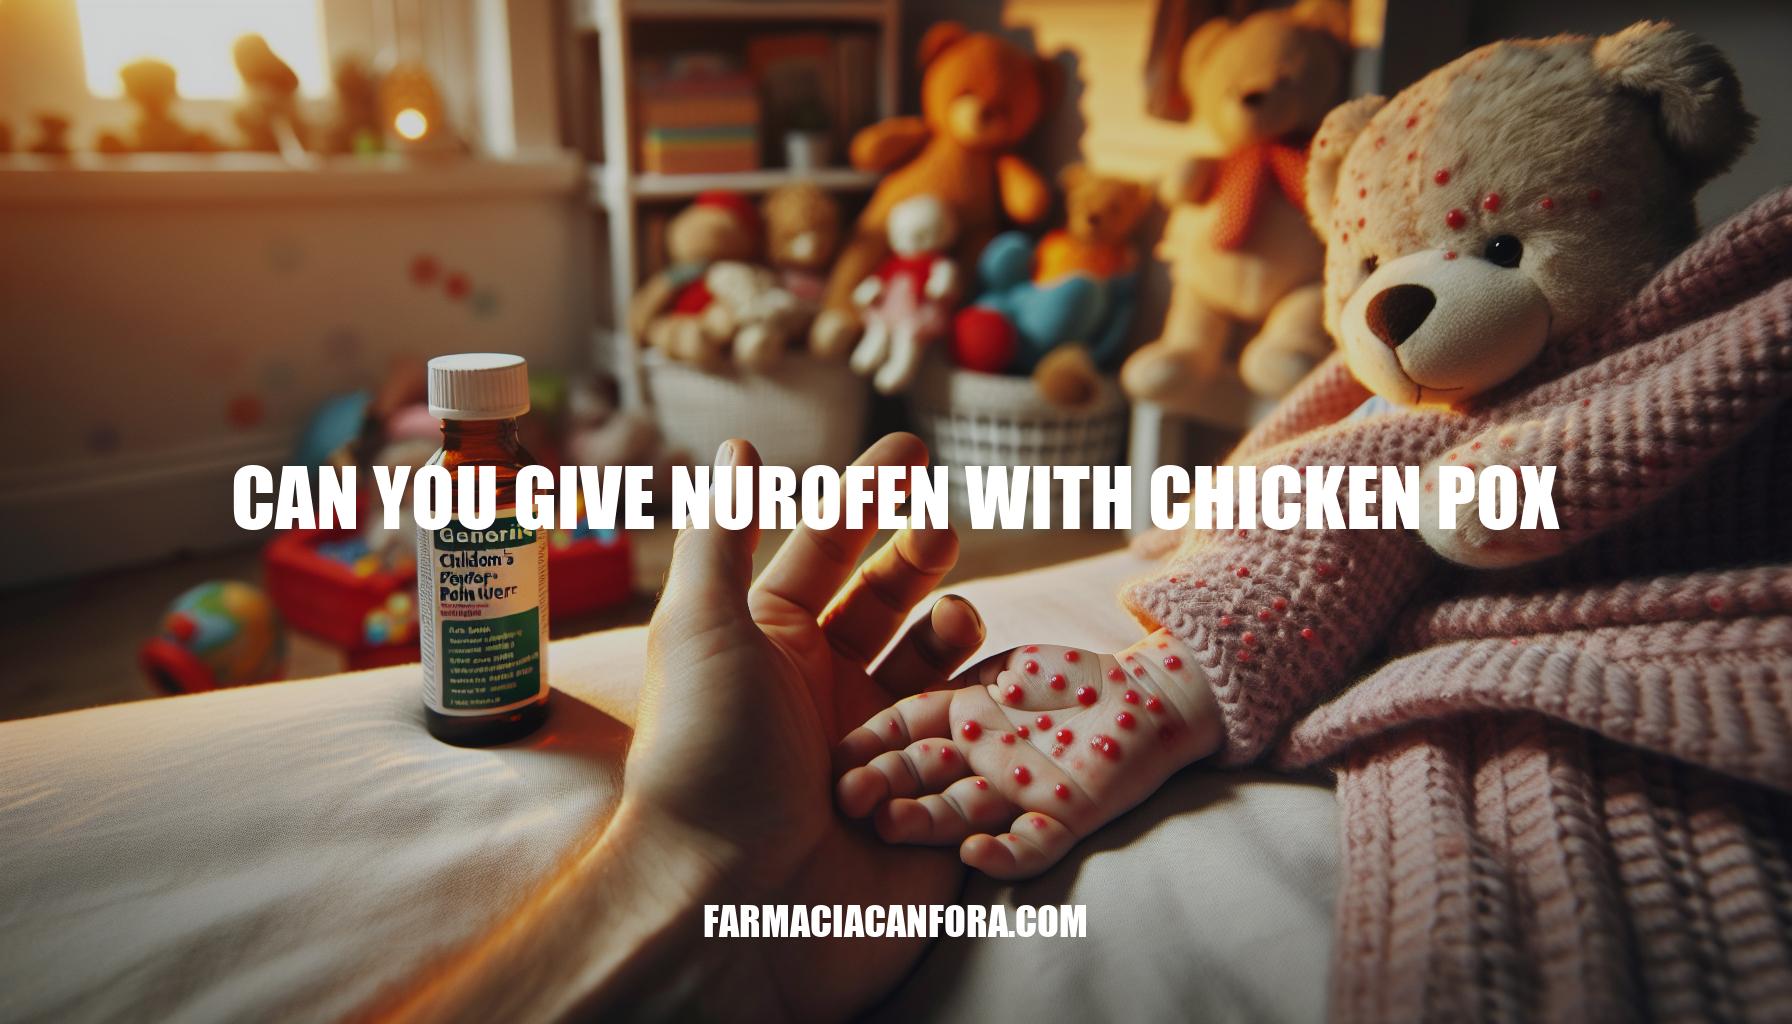 Can You Give Nurofen with Chicken Pox: Safety Tips and Recommendations